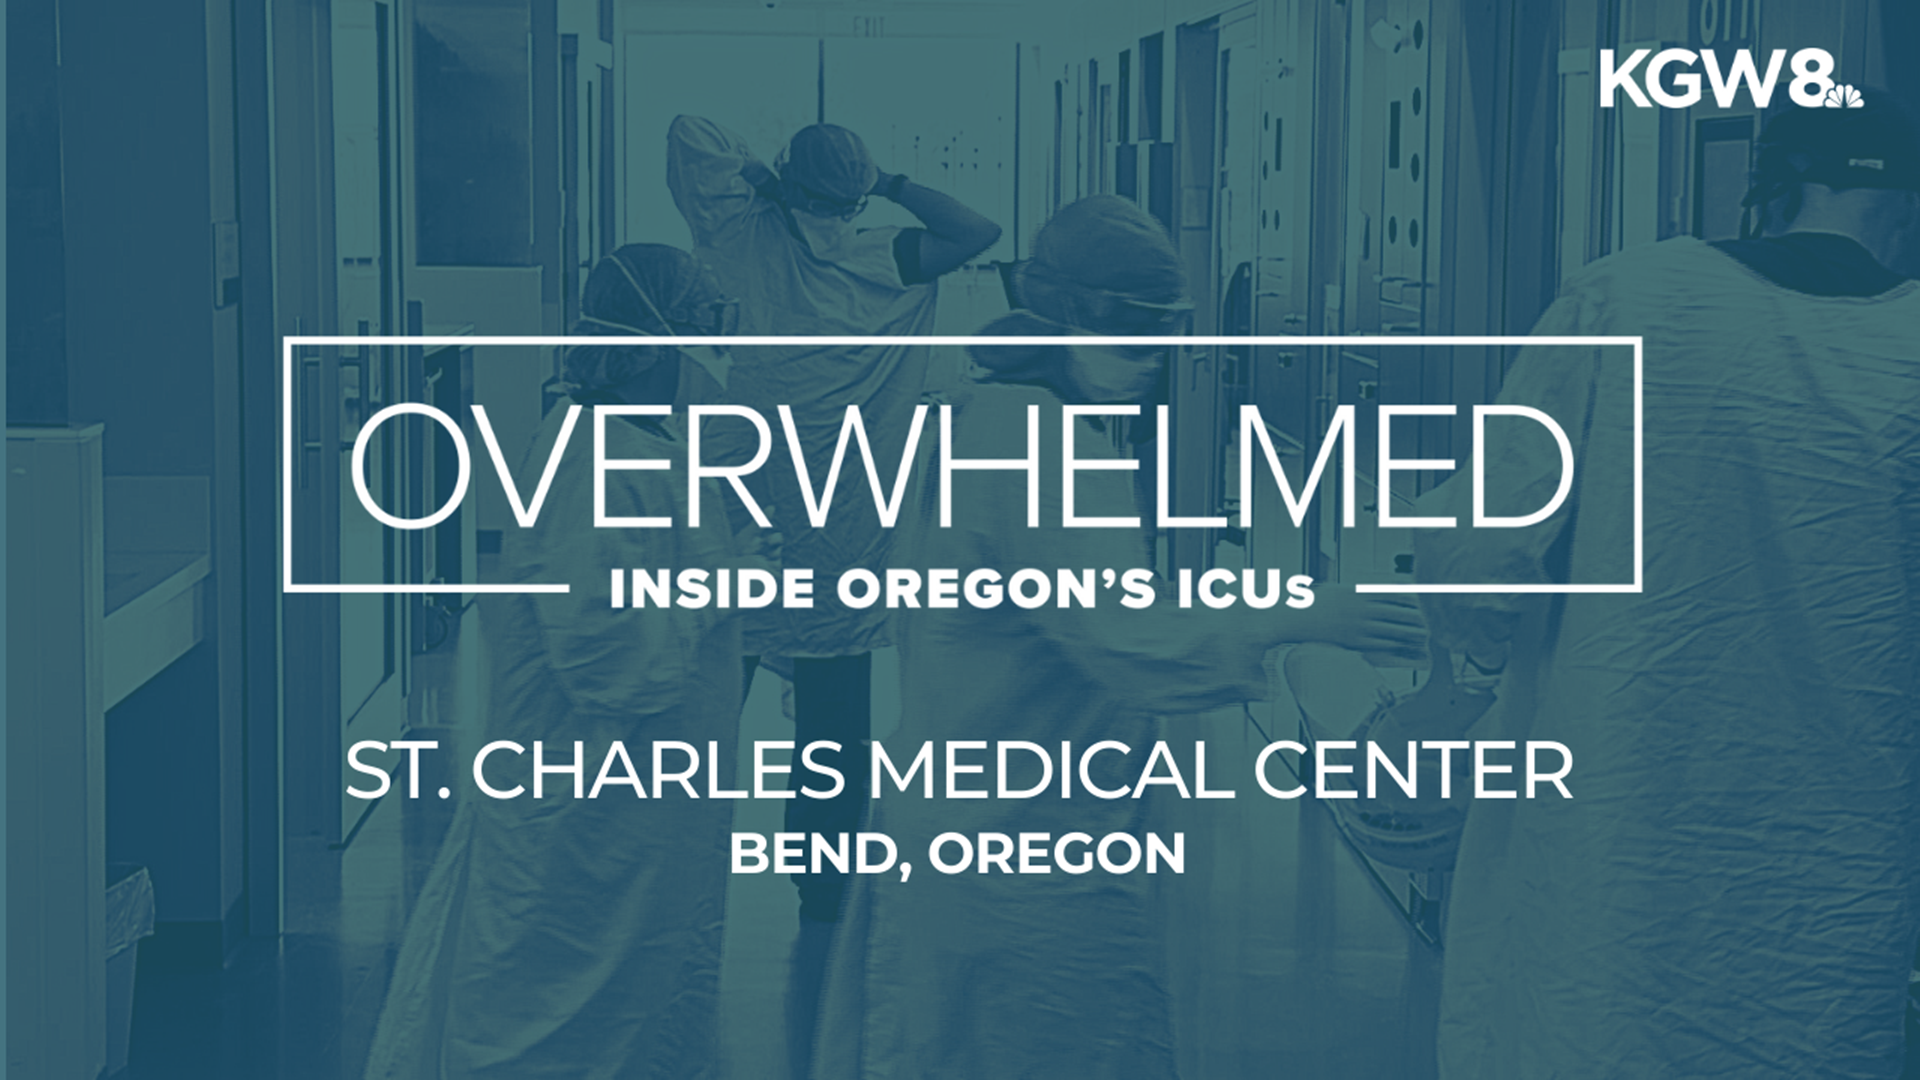 St. Charles Medical Center in Bend allowed KGW crews to spend a day in its COVID ICU, where the area's sickest patients are treated.